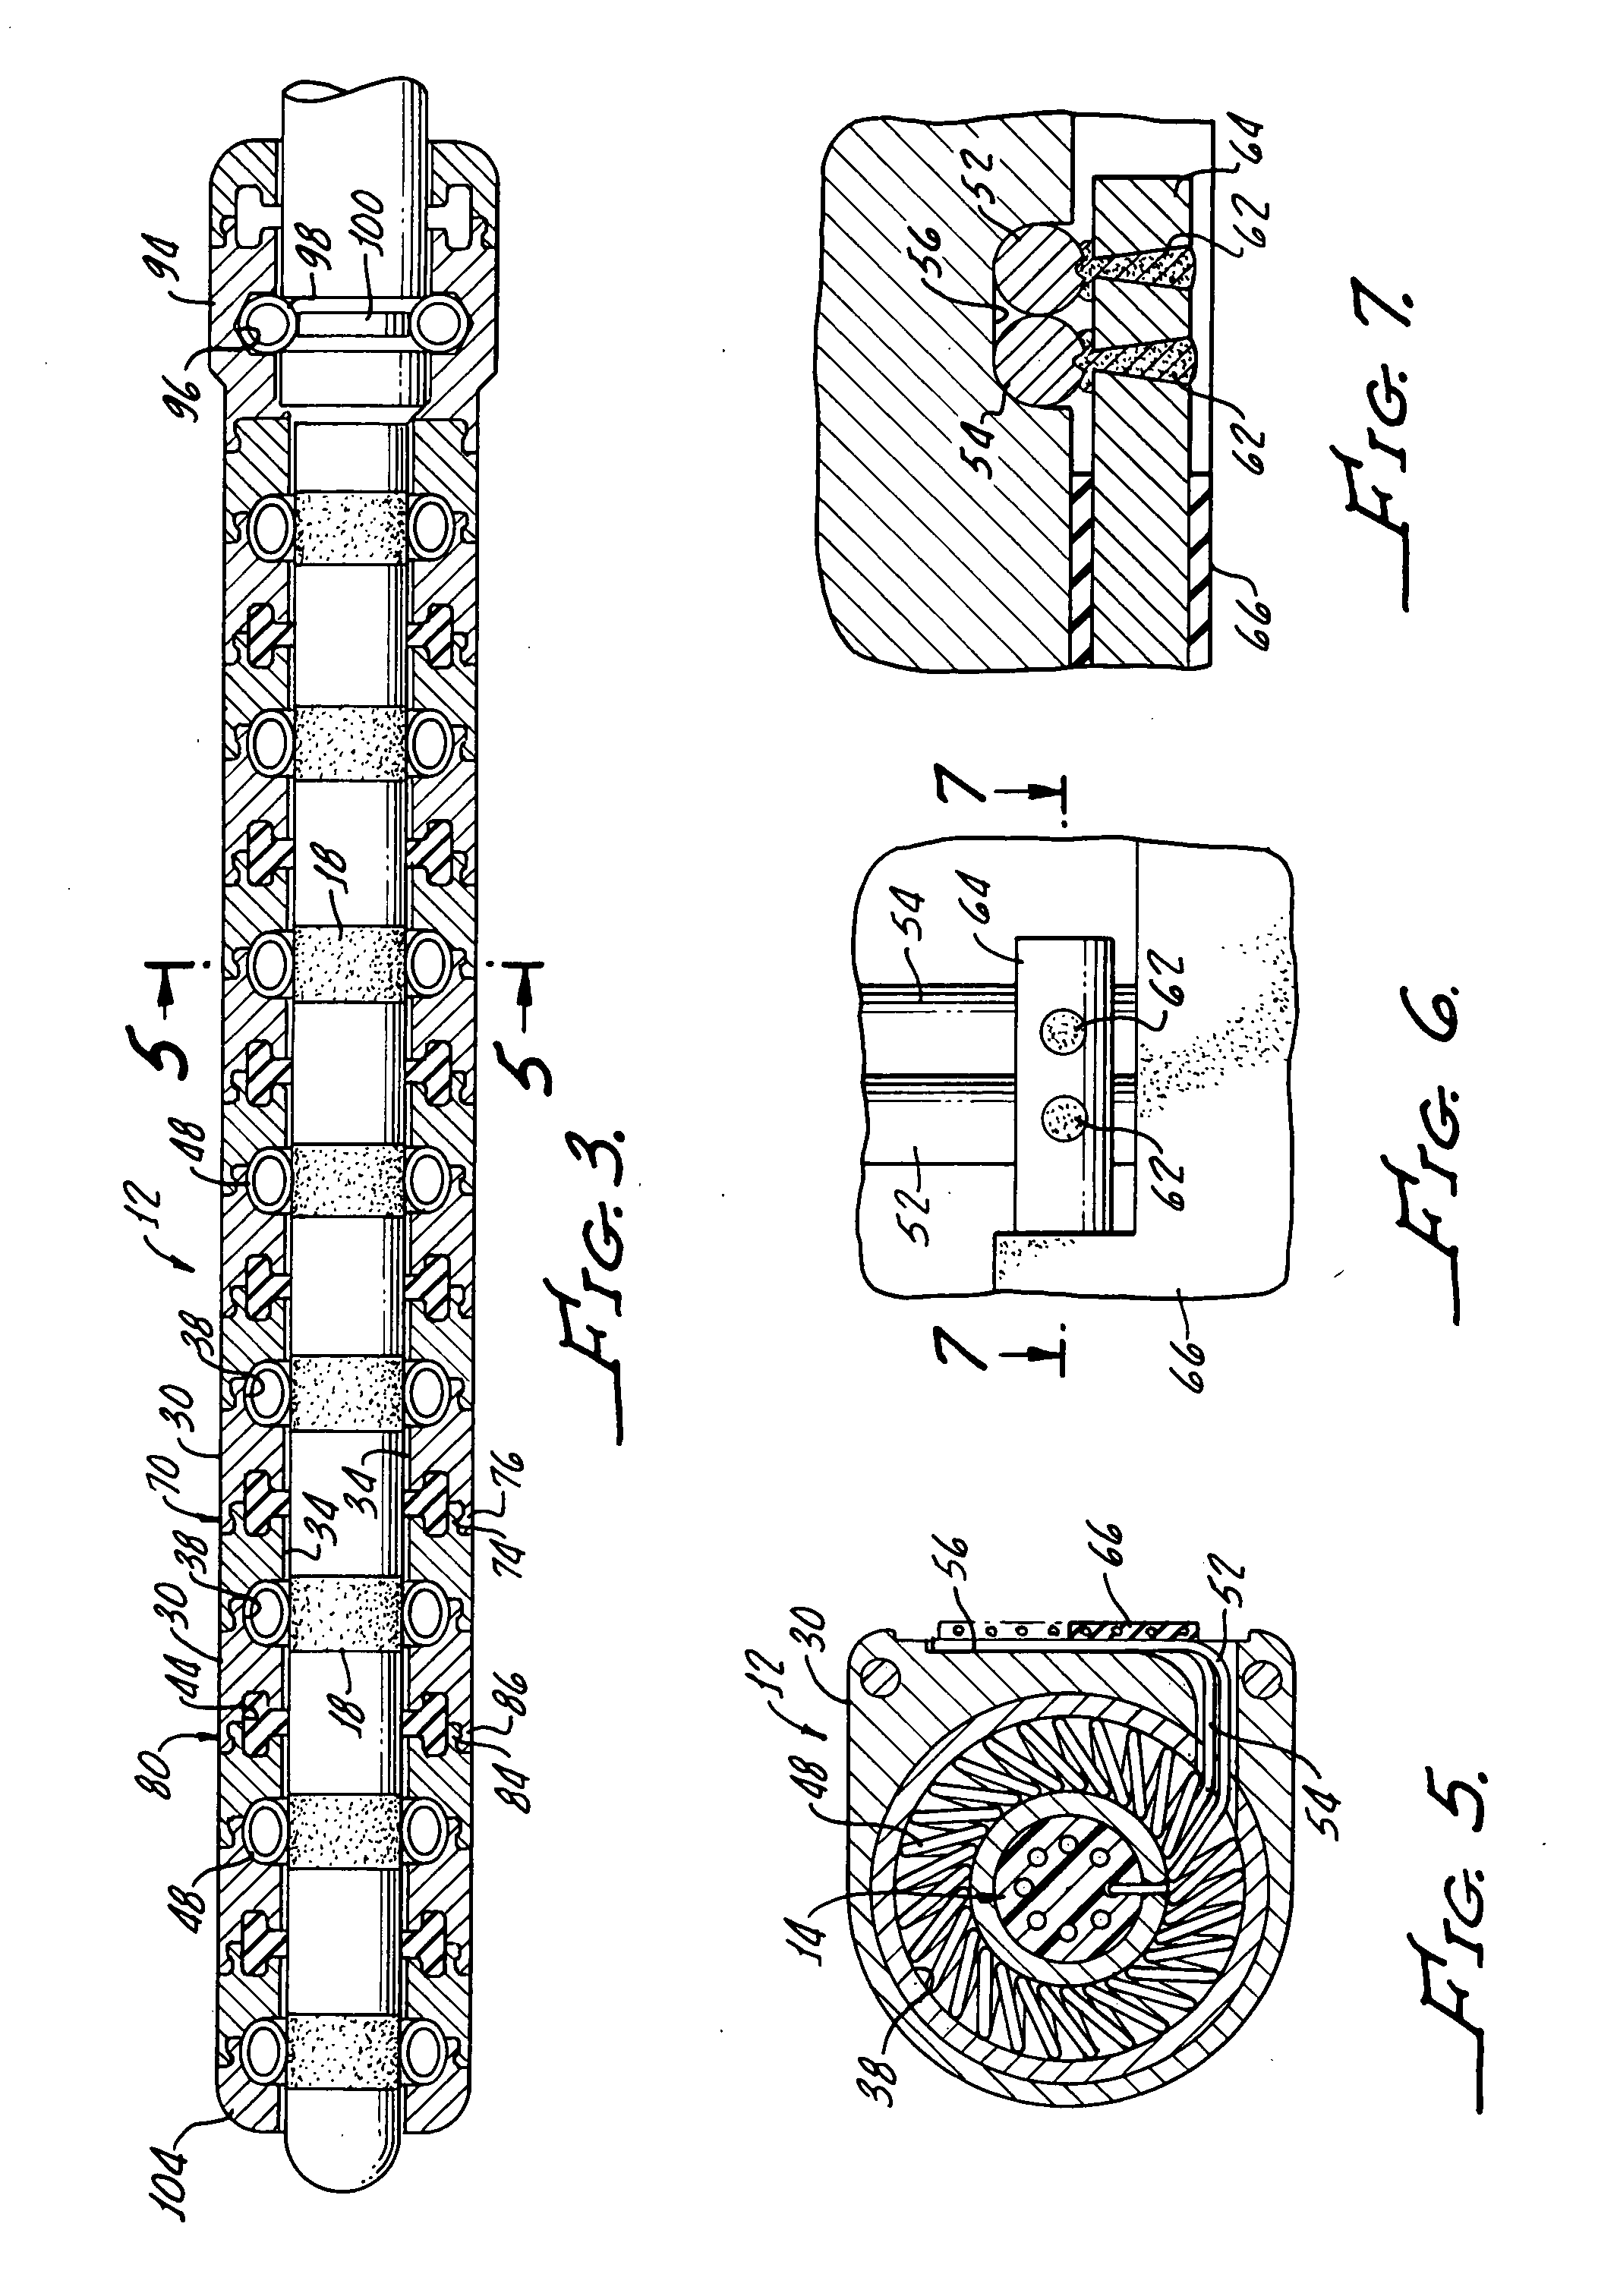 Stackable assembly for direct connection between a pulse generator and a human body